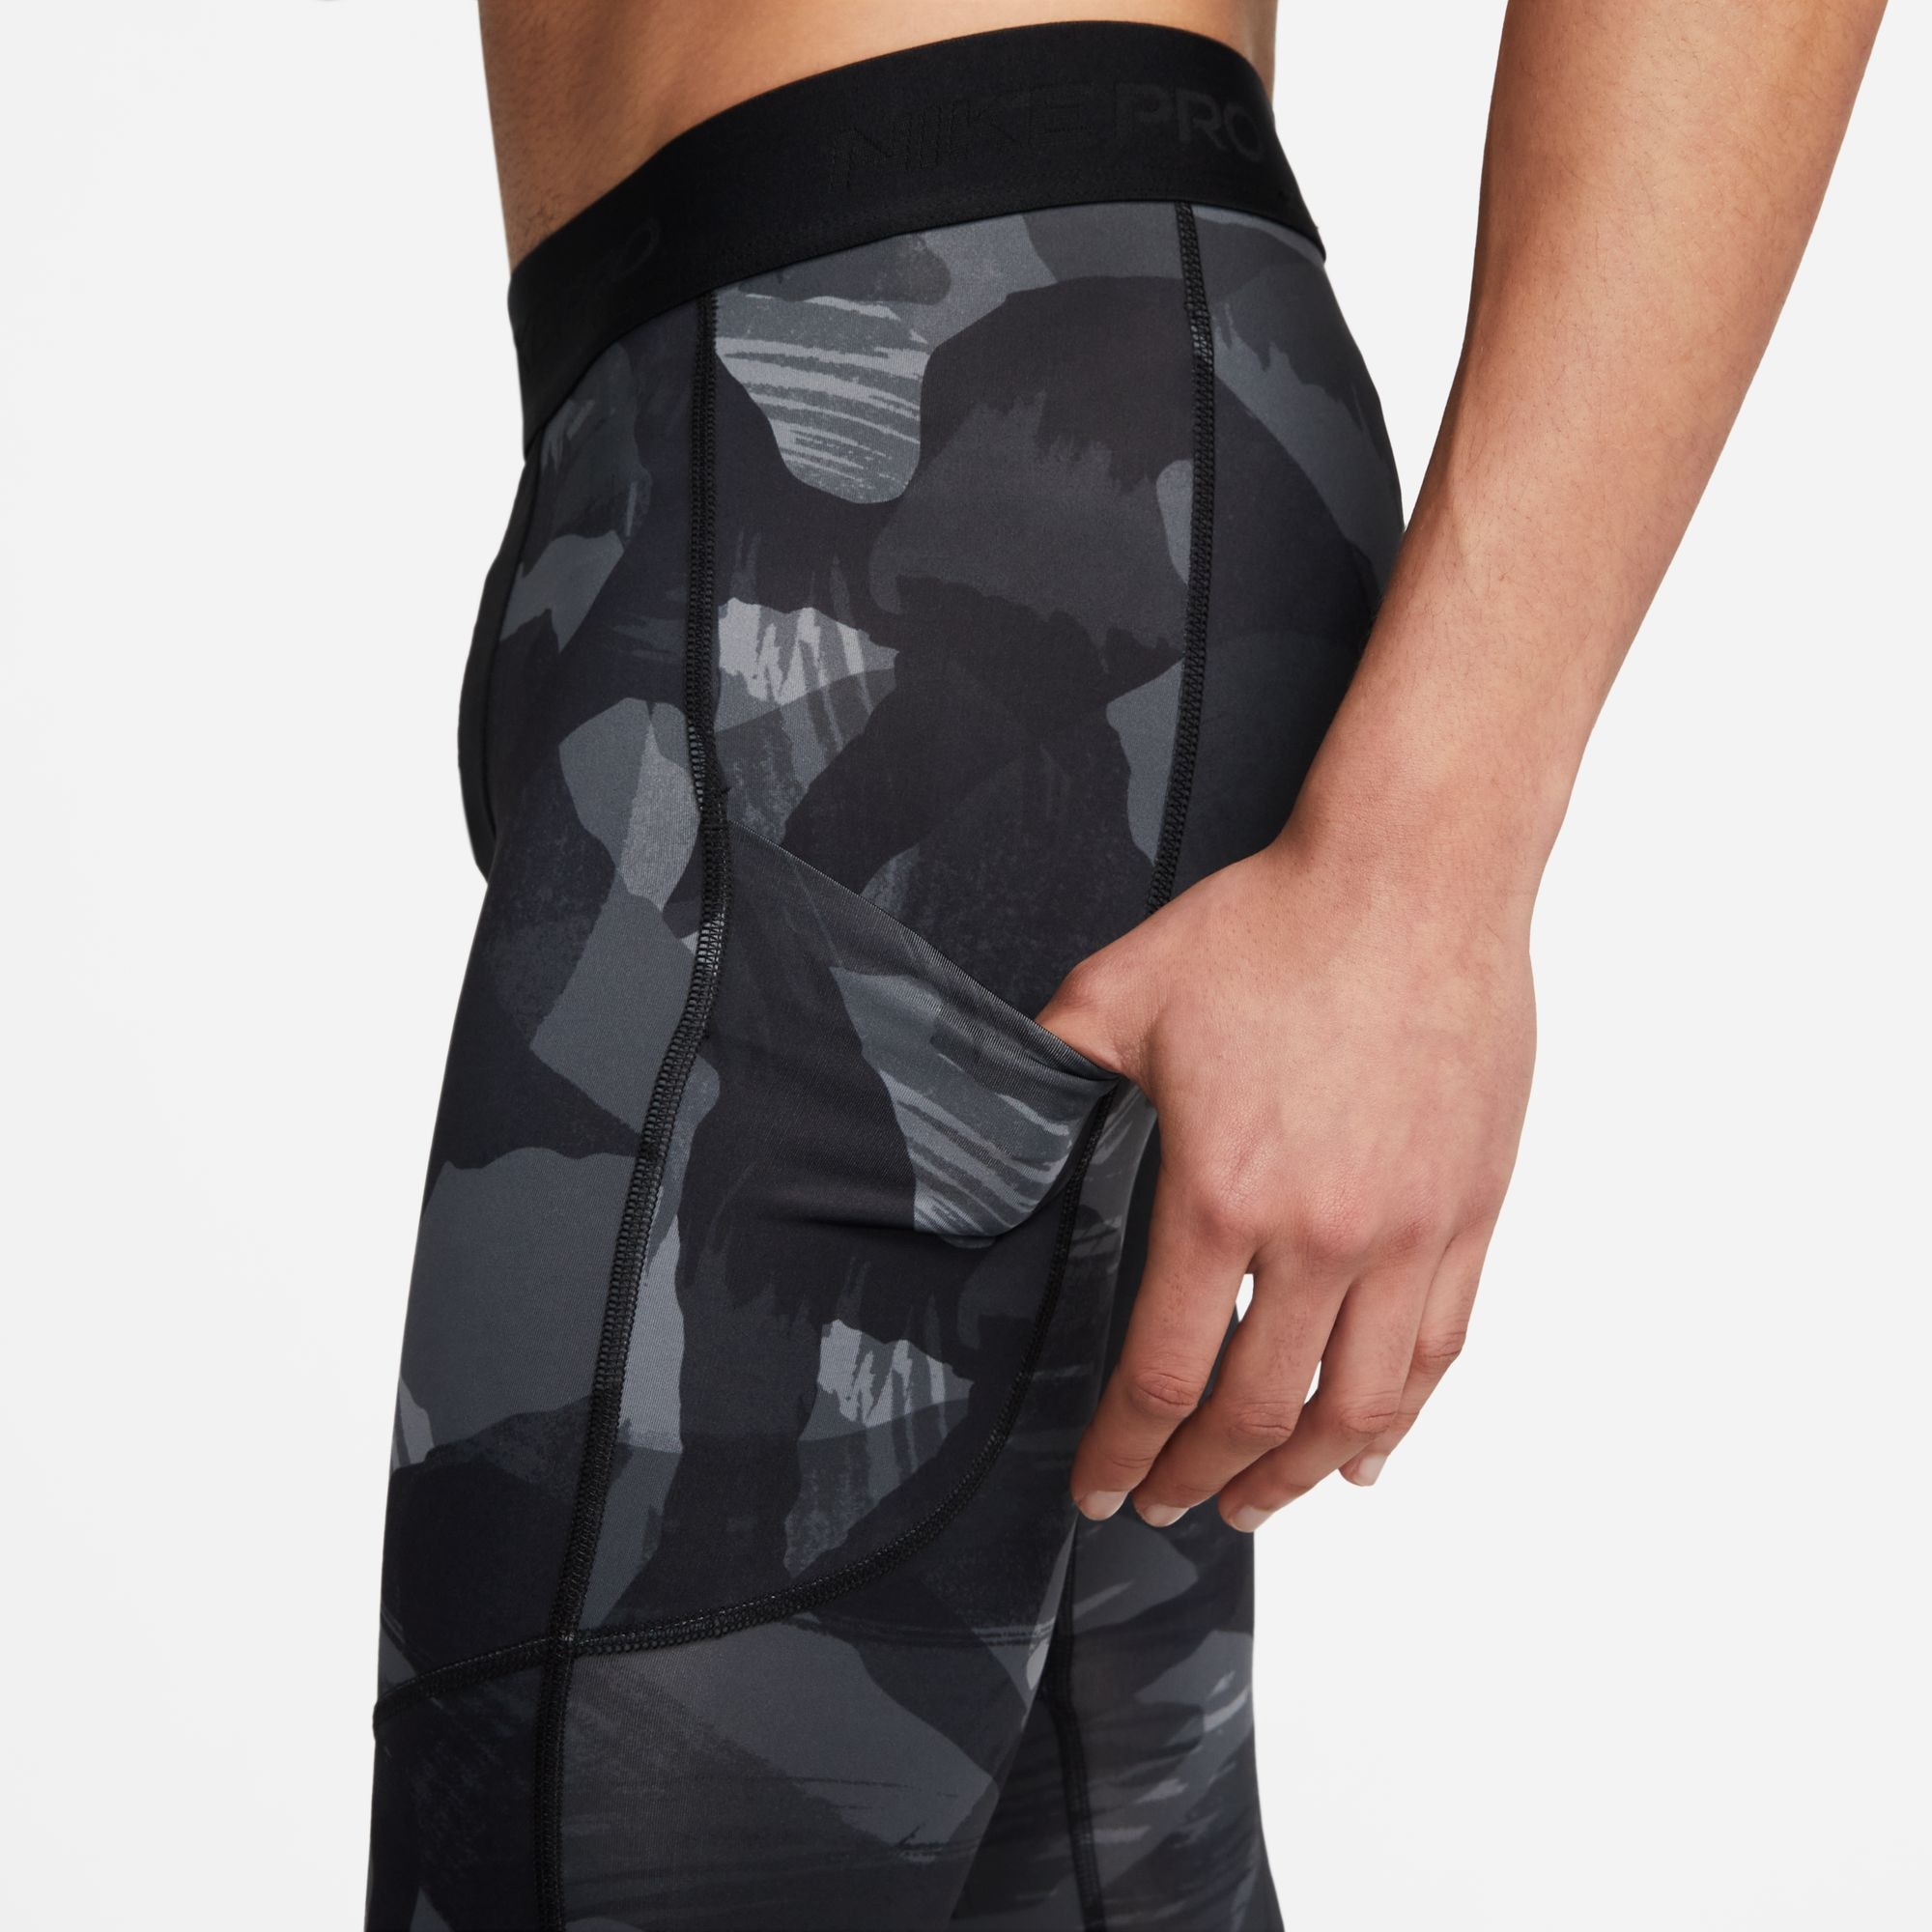 Nike Pro Training tights in all over camo print